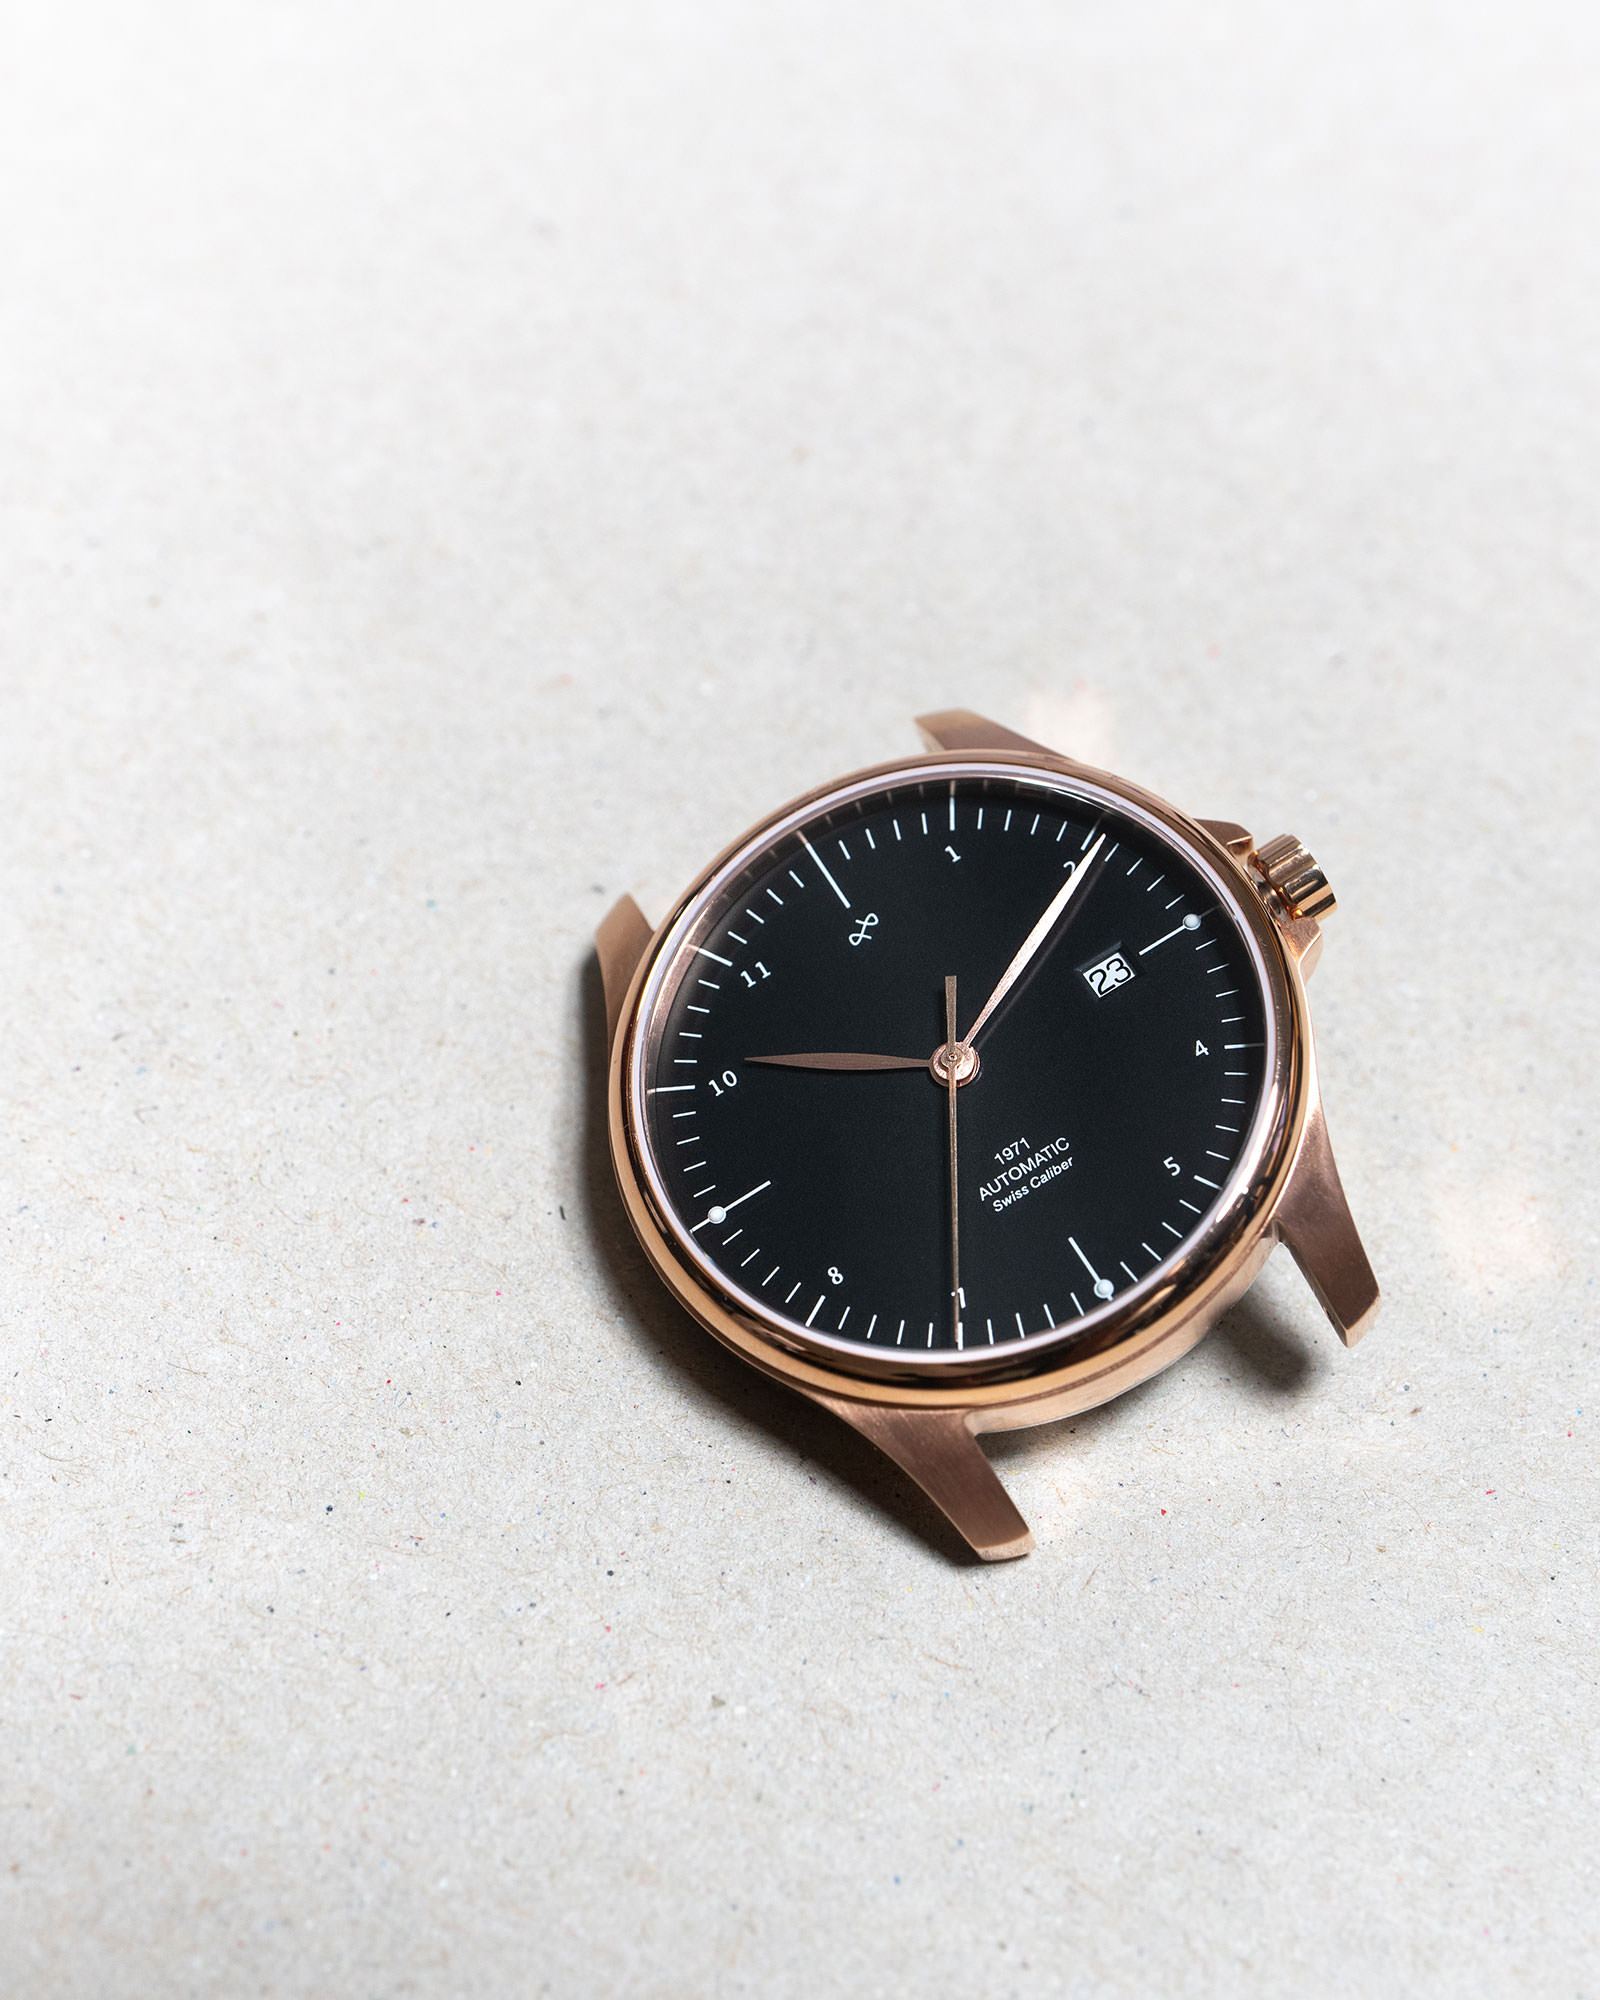 About Vintage - 1971 Automatic, Rose Gold / Black - Swiss Made